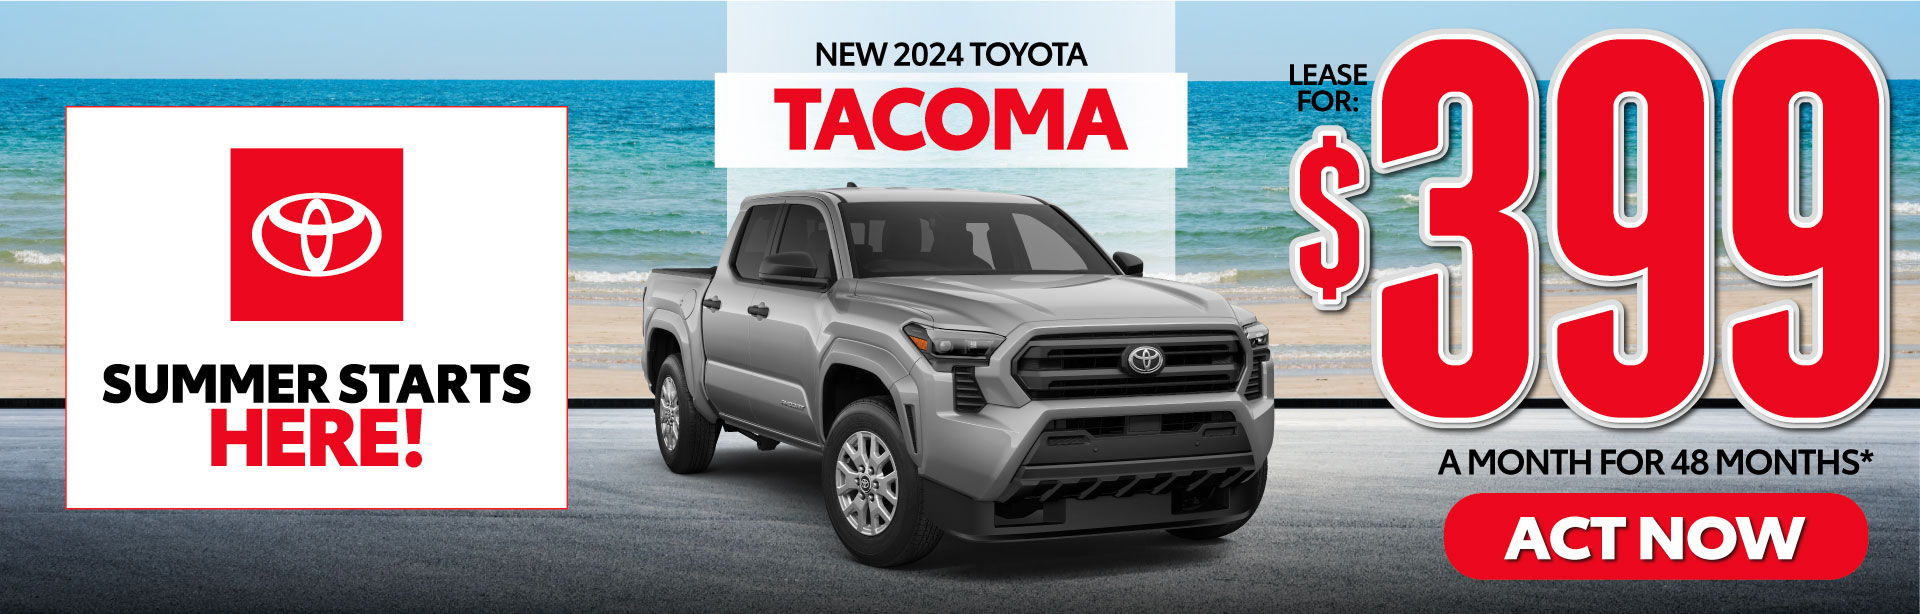 New 2024 Toyota Tacoma - Lease for $399 for 48 months* | Act Now